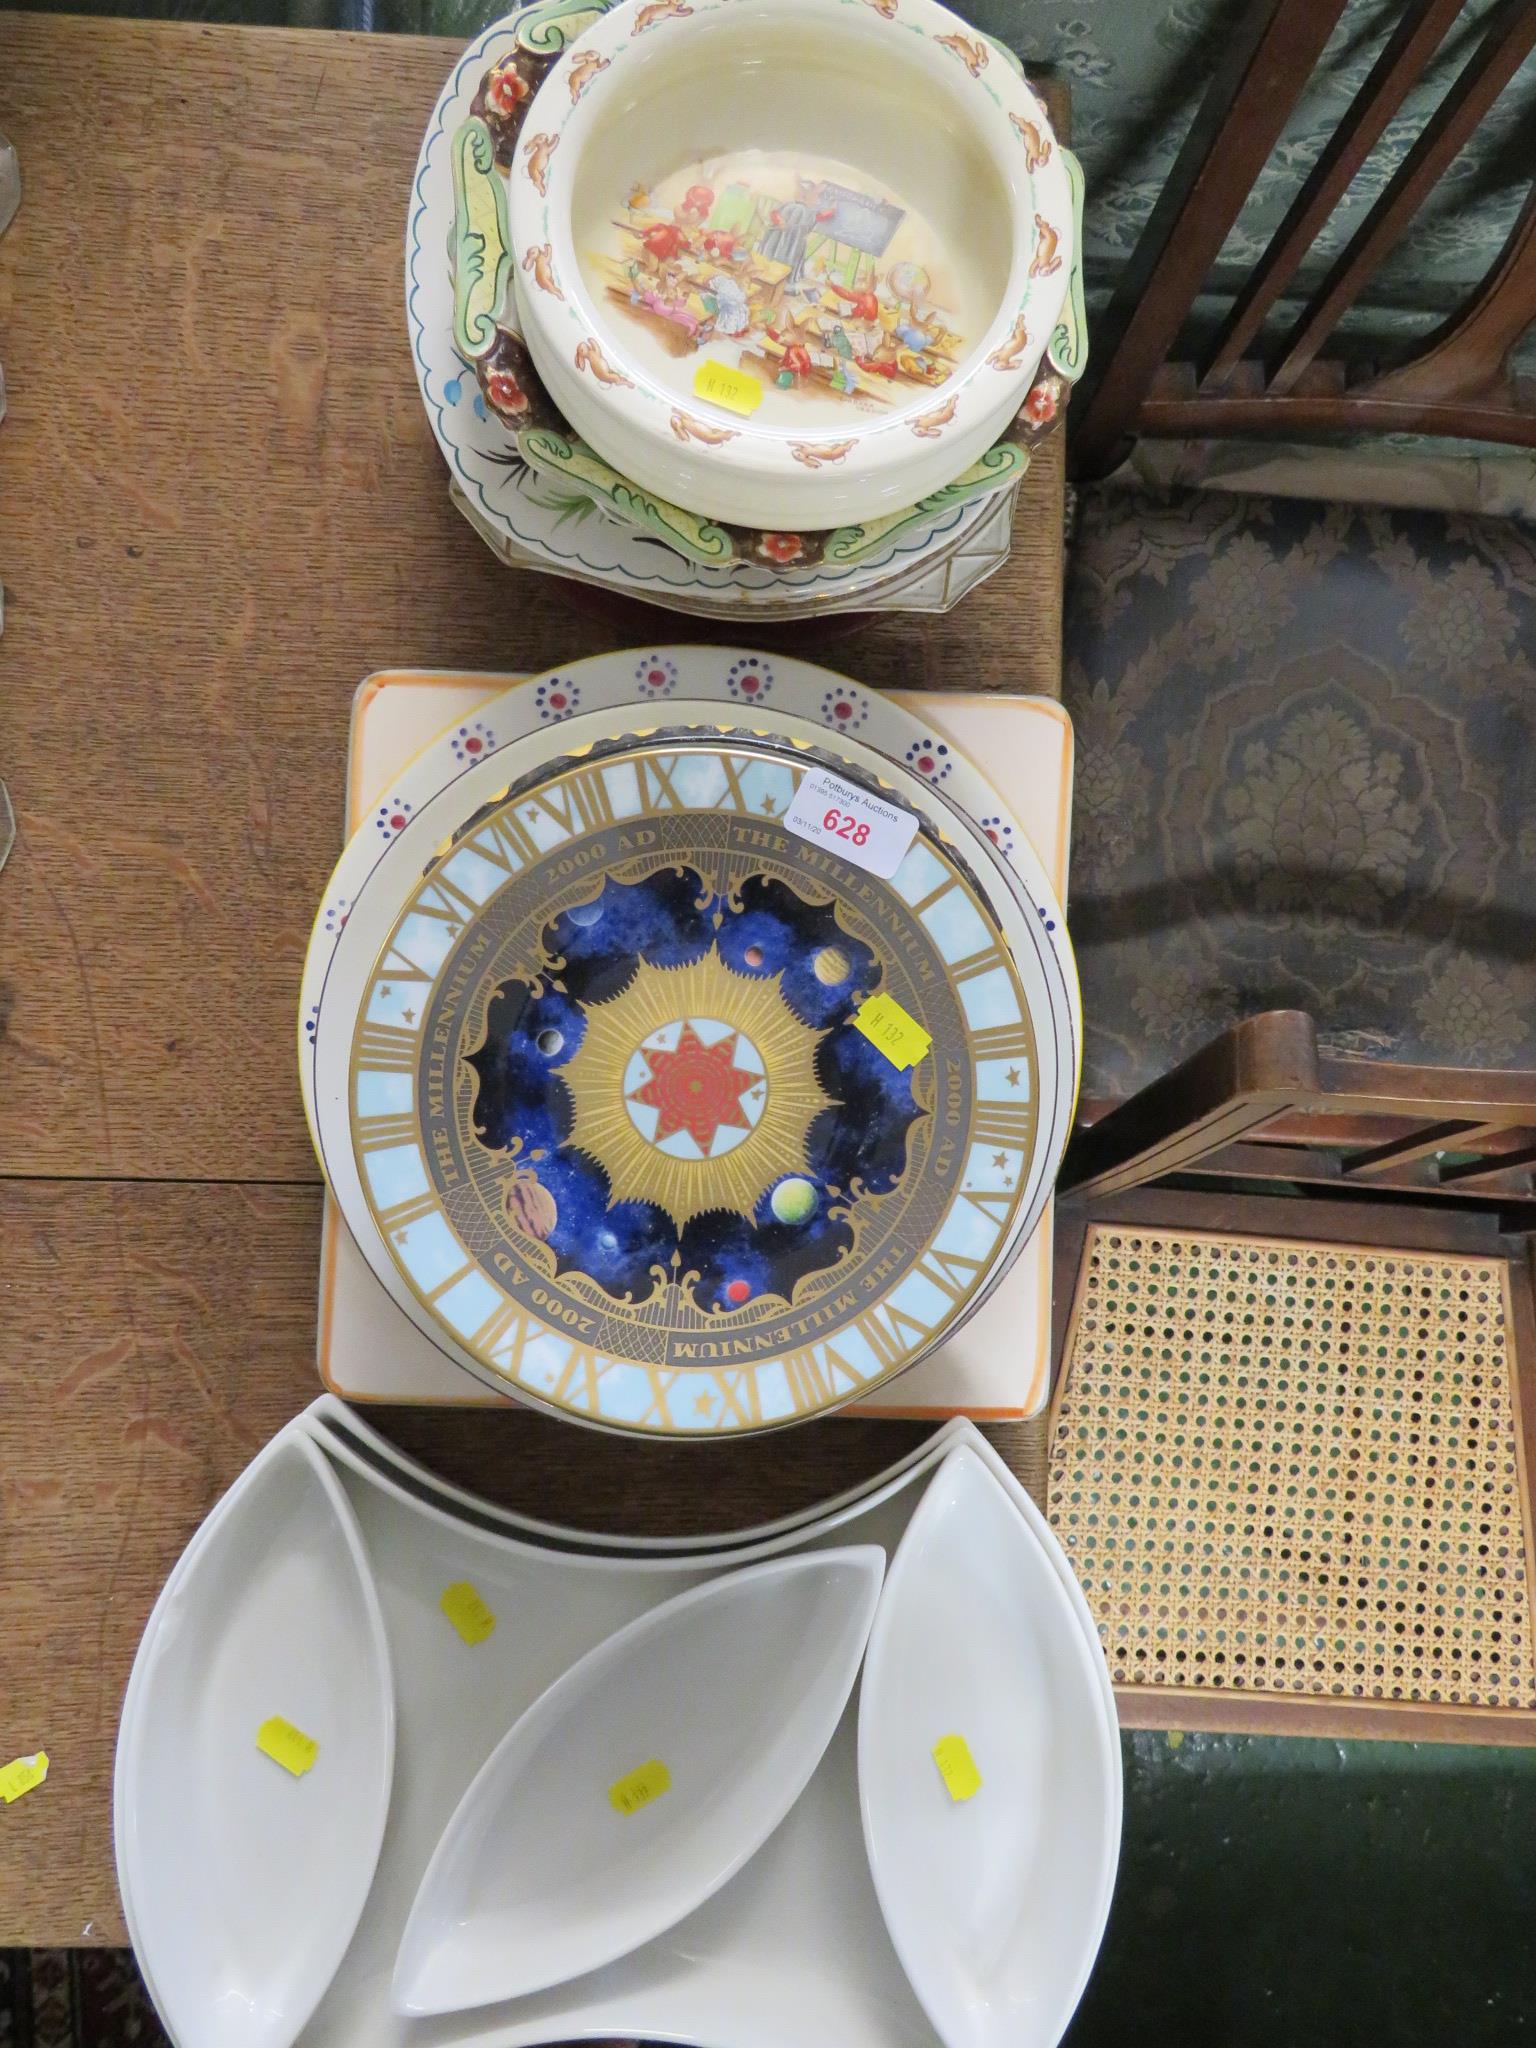 ROYAL DOULTON BUNNYKINS DISH, A ROYAL WORCESTER COLLECTORS PLATE AND OTHER DECORATIVE CHINA PLATES